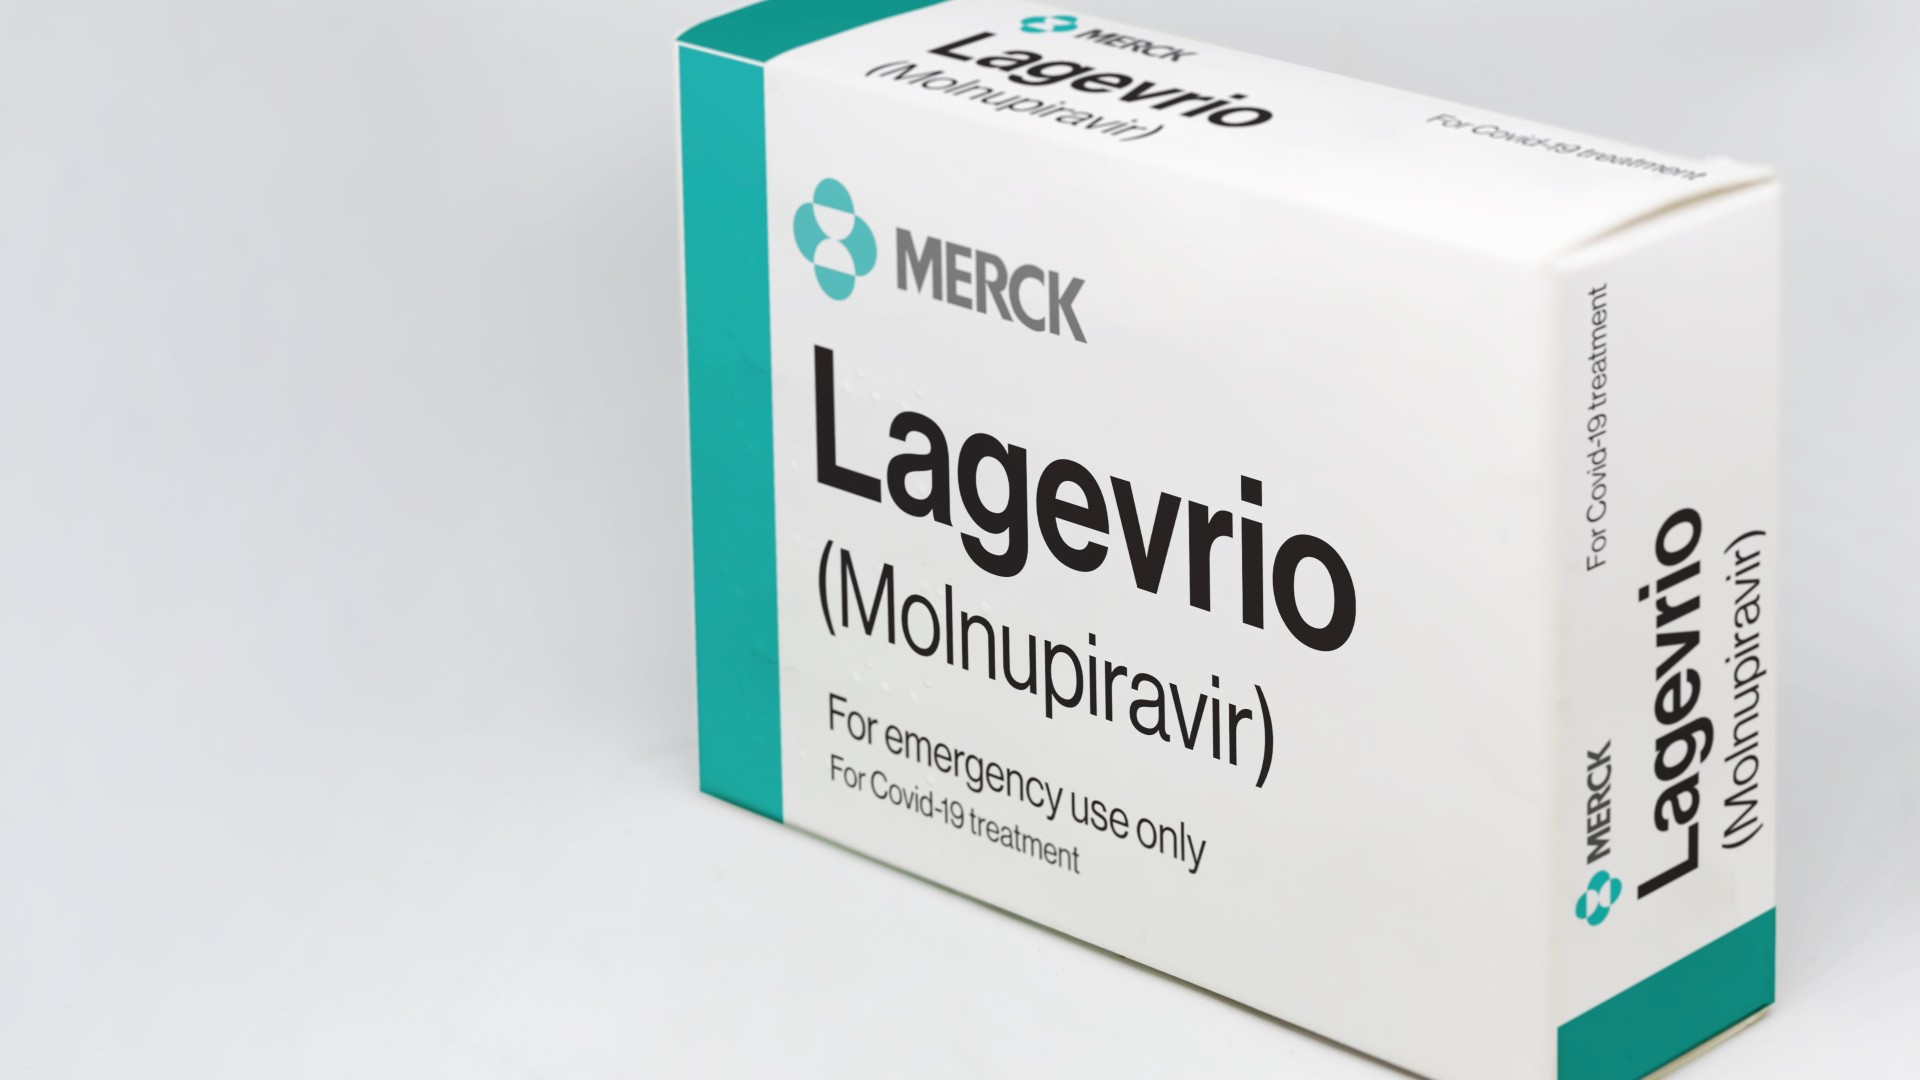 Box of Lagevrio pills against a white background